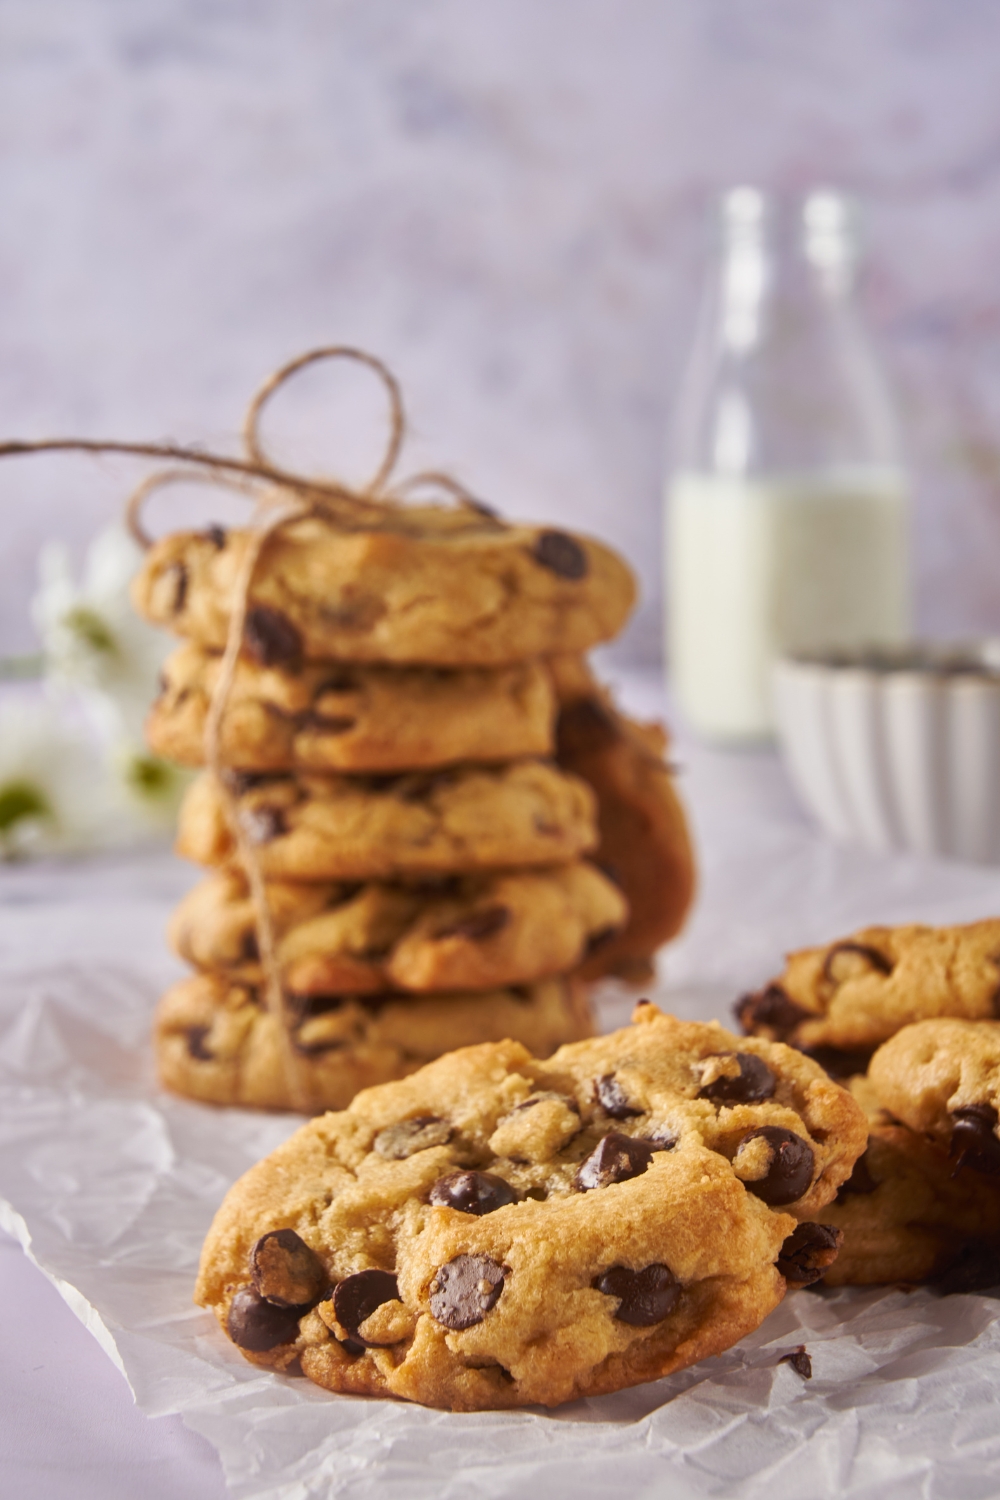 A pile of chocolate chip cookies with a stack of cookies tied with twine in the background.